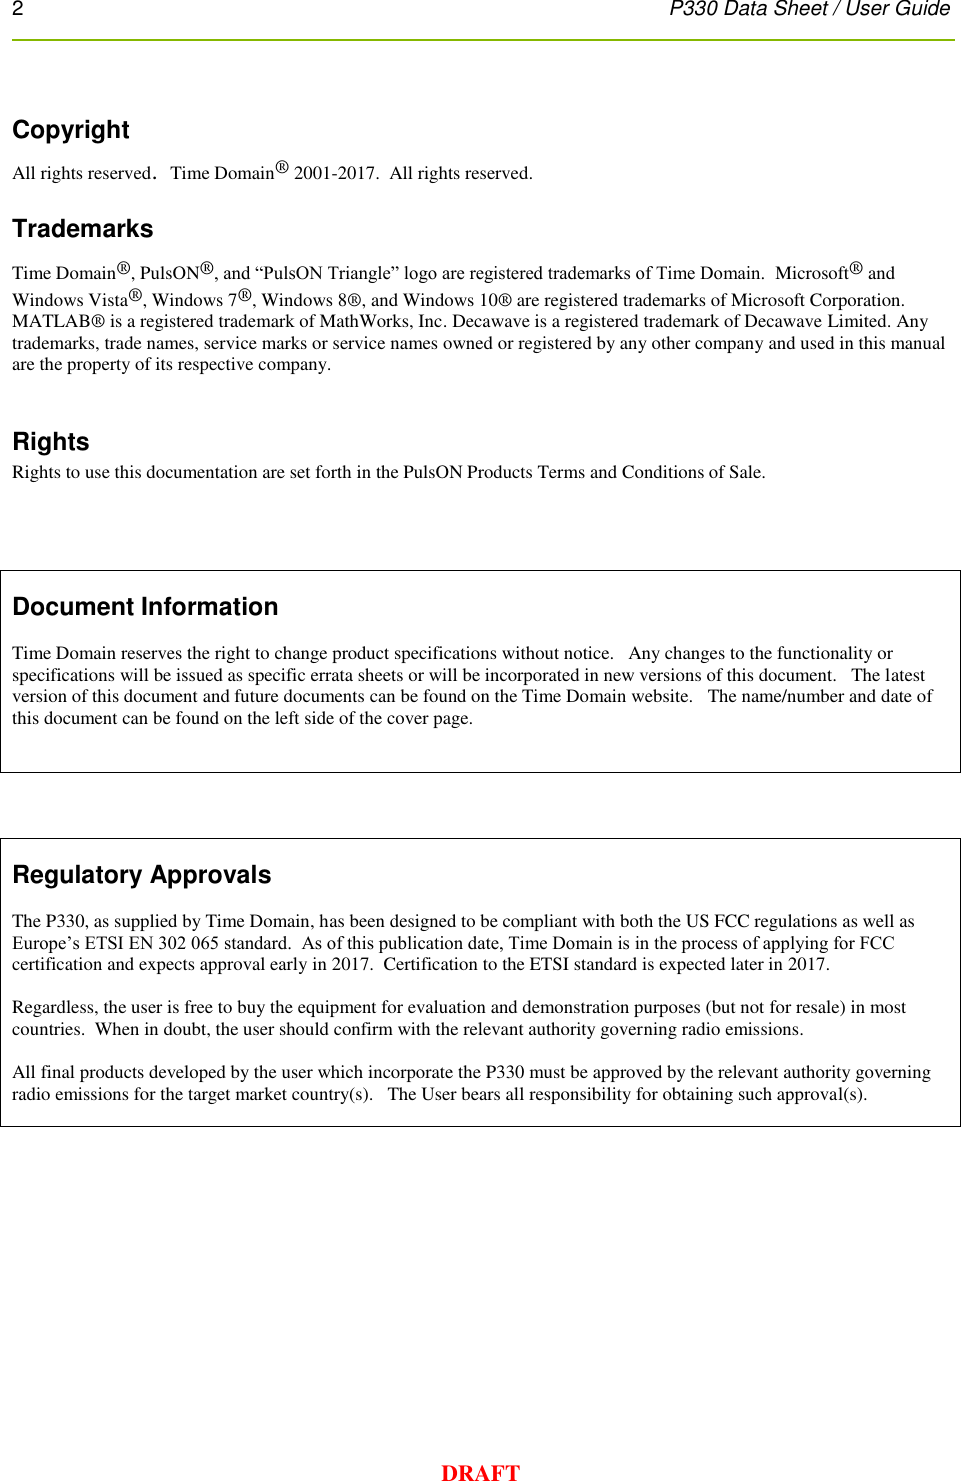 2      P330 Data Sheet / User Guide  DRAFT  Copyright All rights reserved.  Time Domain® 2001-2017.  All rights reserved.  Trademarks Time Domain®, PulsON®, and “PulsON Triangle” logo are registered trademarks of Time Domain.  Microsoft® and Windows Vista®, Windows 7®, Windows 8®, and Windows 10® are registered trademarks of Microsoft Corporation.  MATLAB® is a registered trademark of MathWorks, Inc. Decawave is a registered trademark of Decawave Limited. Any trademarks, trade names, service marks or service names owned or registered by any other company and used in this manual are the property of its respective company.  Rights Rights to use this documentation are set forth in the PulsON Products Terms and Conditions of Sale.       Document Information  Time Domain reserves the right to change product specifications without notice.   Any changes to the functionality or specifications will be issued as specific errata sheets or will be incorporated in new versions of this document.   The latest version of this document and future documents can be found on the Time Domain website.   The name/number and date of this document can be found on the left side of the cover page.         Regulatory Approvals  The P330, as supplied by Time Domain, has been designed to be compliant with both the US FCC regulations as well as Europe’s ETSI EN 302 065 standard.  As of this publication date, Time Domain is in the process of applying for FCC certification and expects approval early in 2017.  Certification to the ETSI standard is expected later in 2017.   Regardless, the user is free to buy the equipment for evaluation and demonstration purposes (but not for resale) in most countries.  When in doubt, the user should confirm with the relevant authority governing radio emissions.  All final products developed by the user which incorporate the P330 must be approved by the relevant authority governing radio emissions for the target market country(s).   The User bears all responsibility for obtaining such approval(s).      